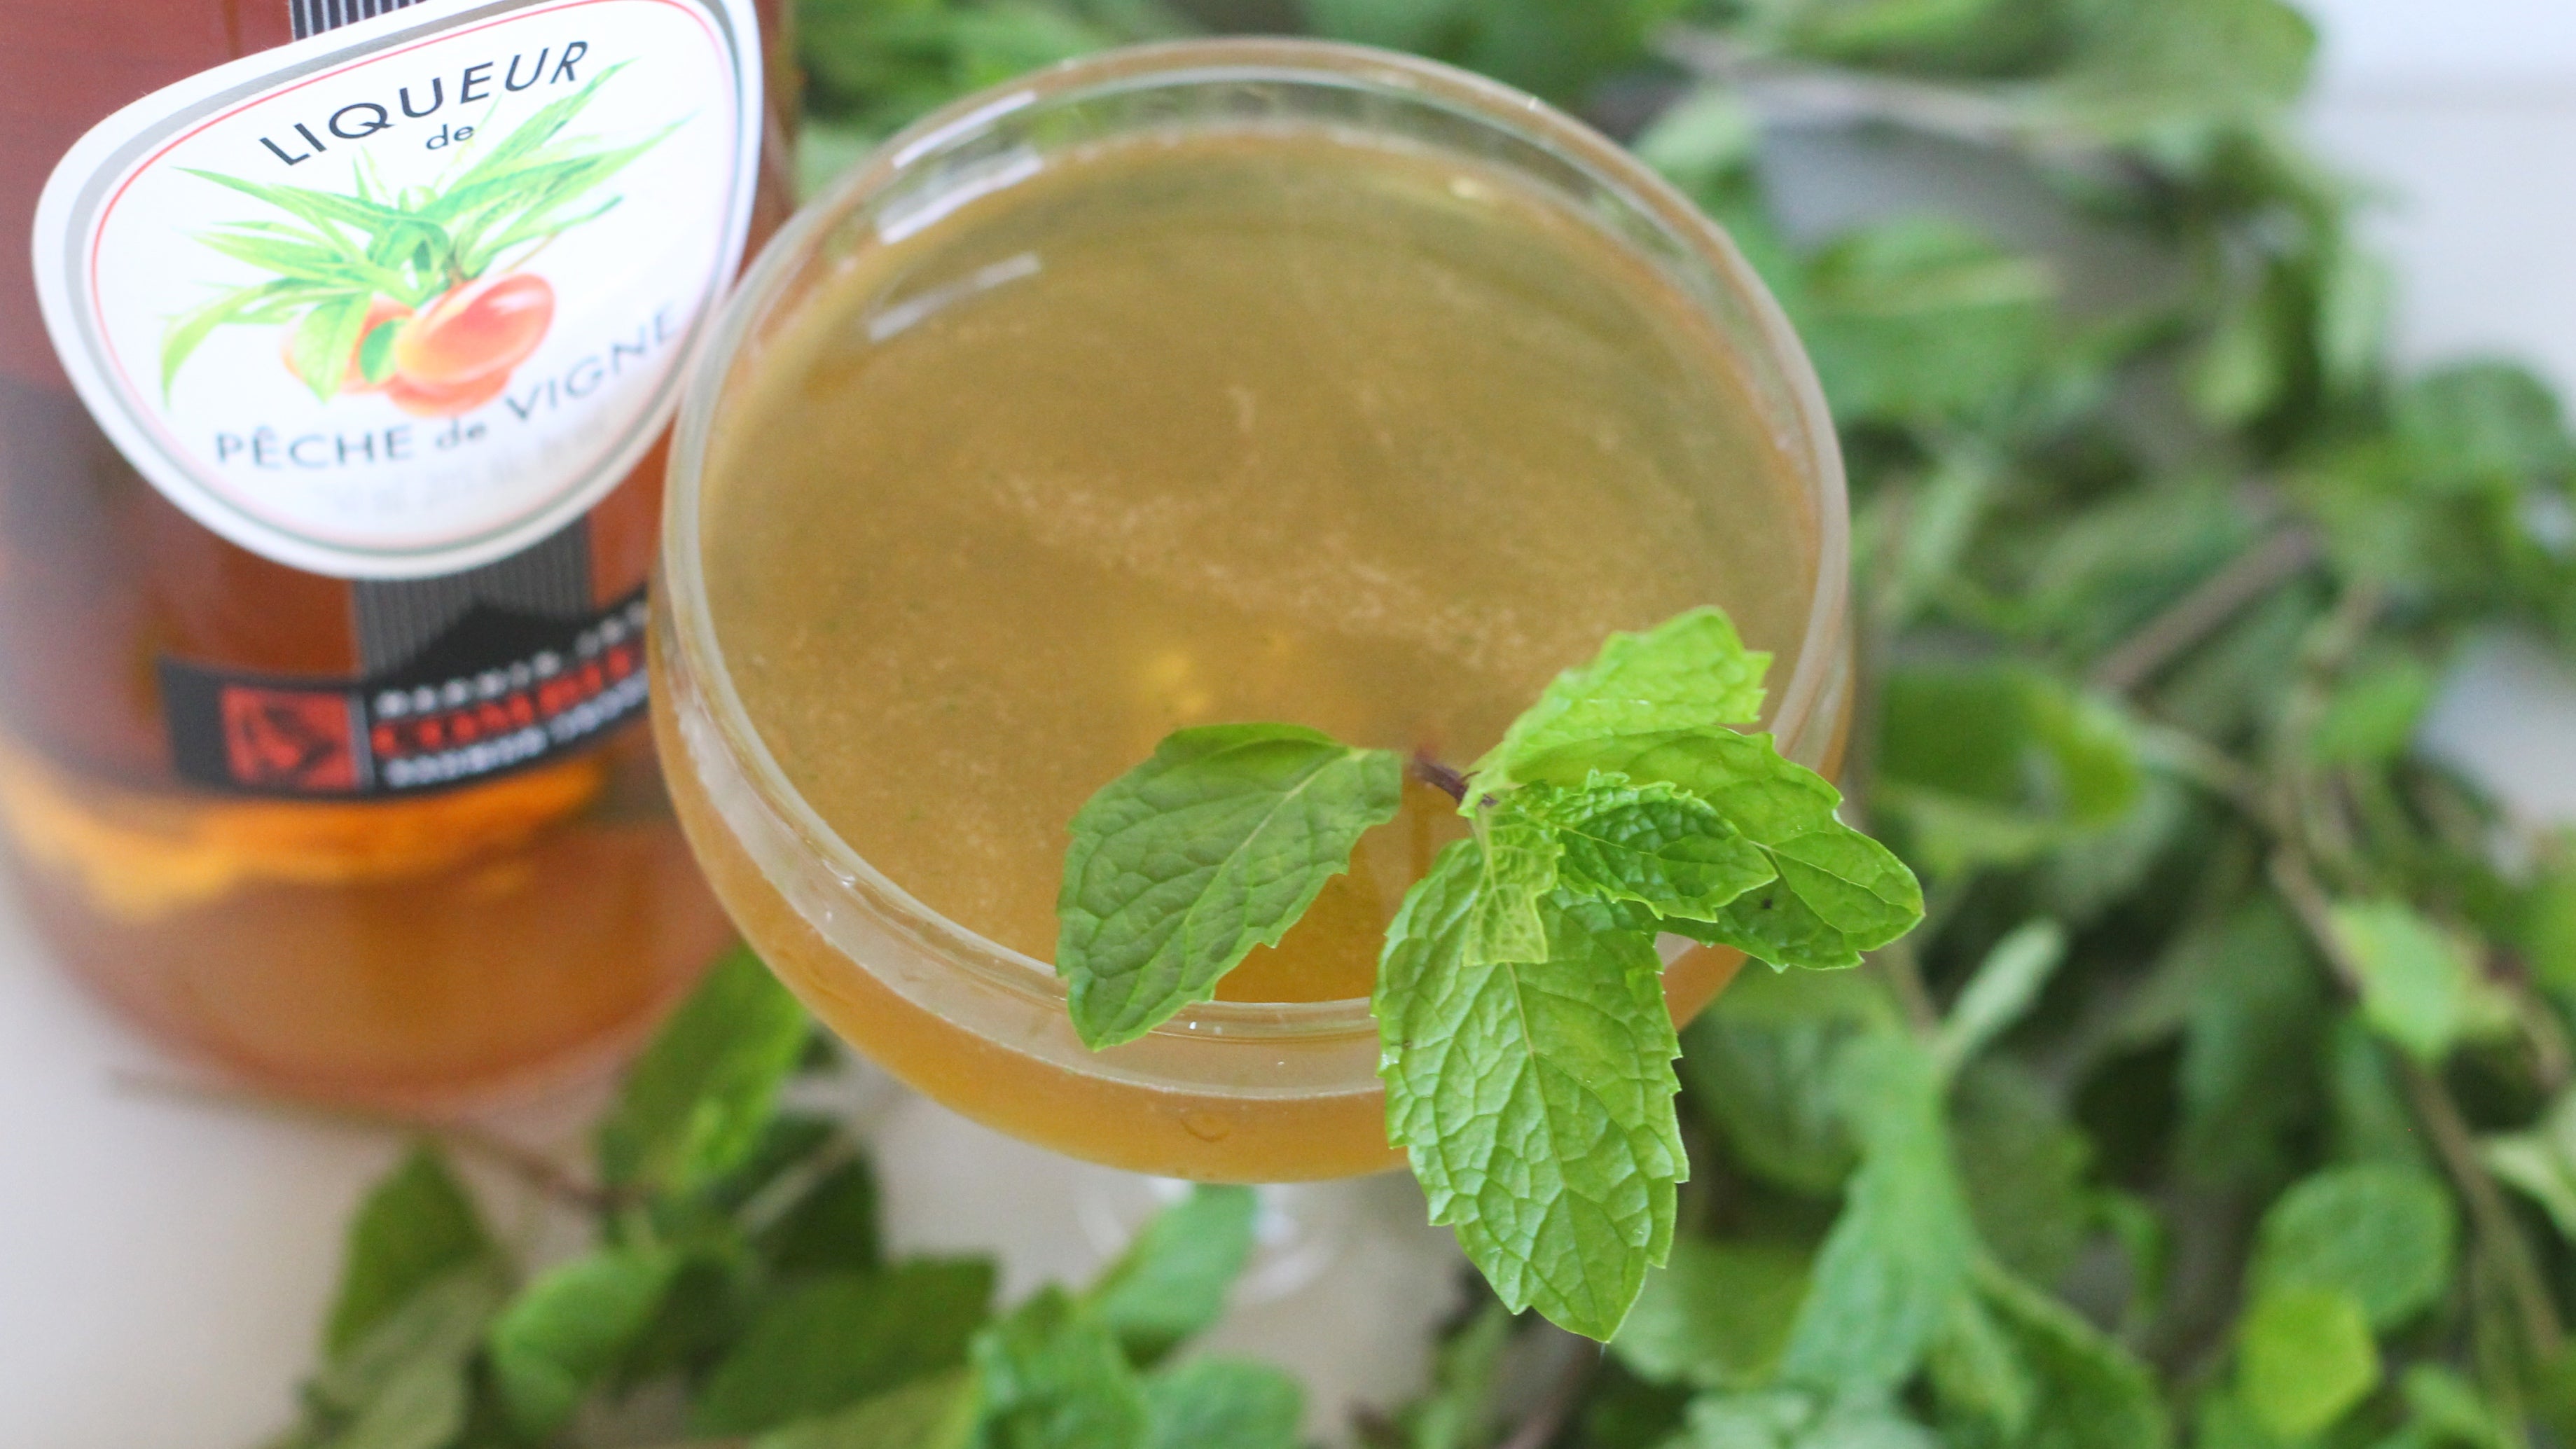 Enjoy This Peach-Mint Cocktail For No Particular Reason